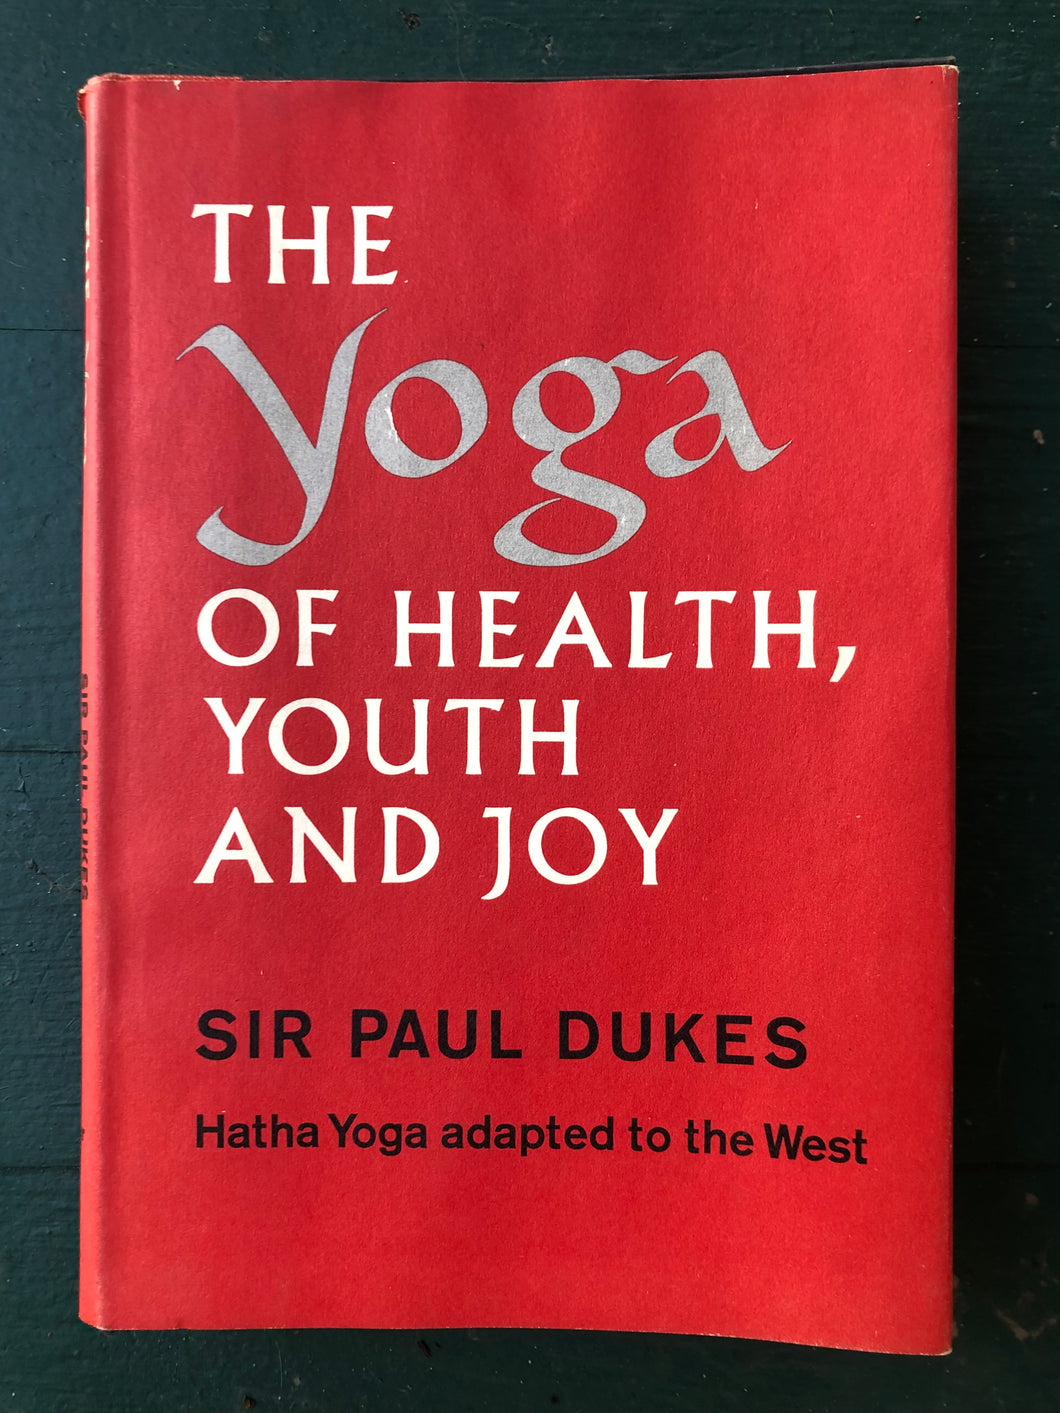 The Yoga of Health, Youth and Joy: Hatha Yoga Adapted to the West. by Sir Paul Dukes